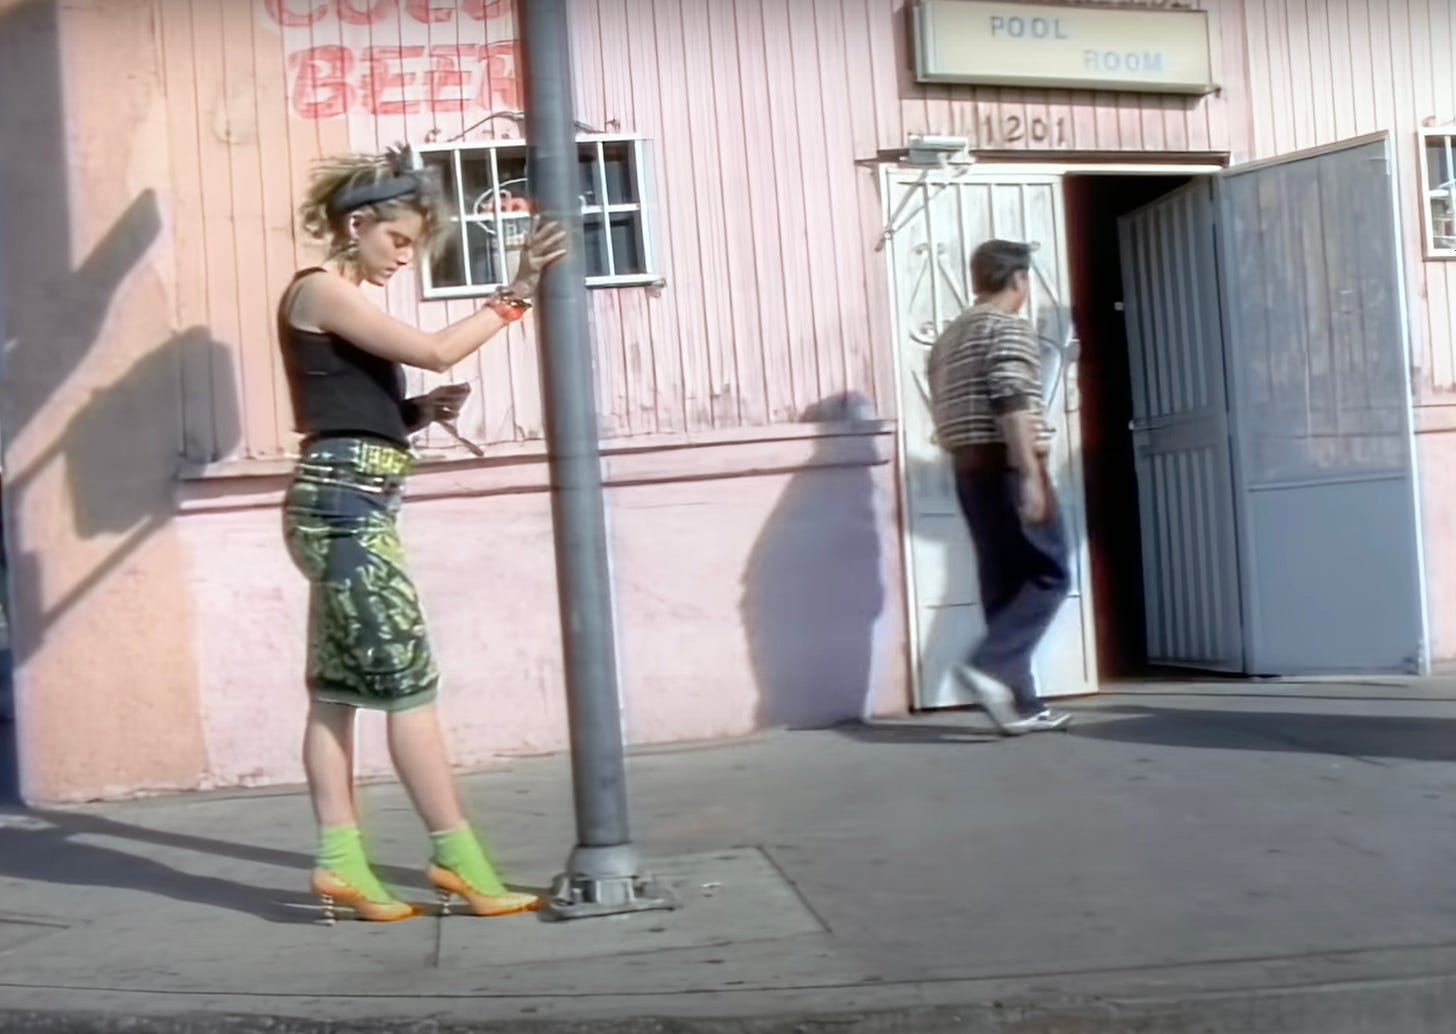 Still from the Borderline video featuring Madonna standing by a lamppost wearing her usual 1980s flea market attire including fluorescent green socks and bright orange stilettos